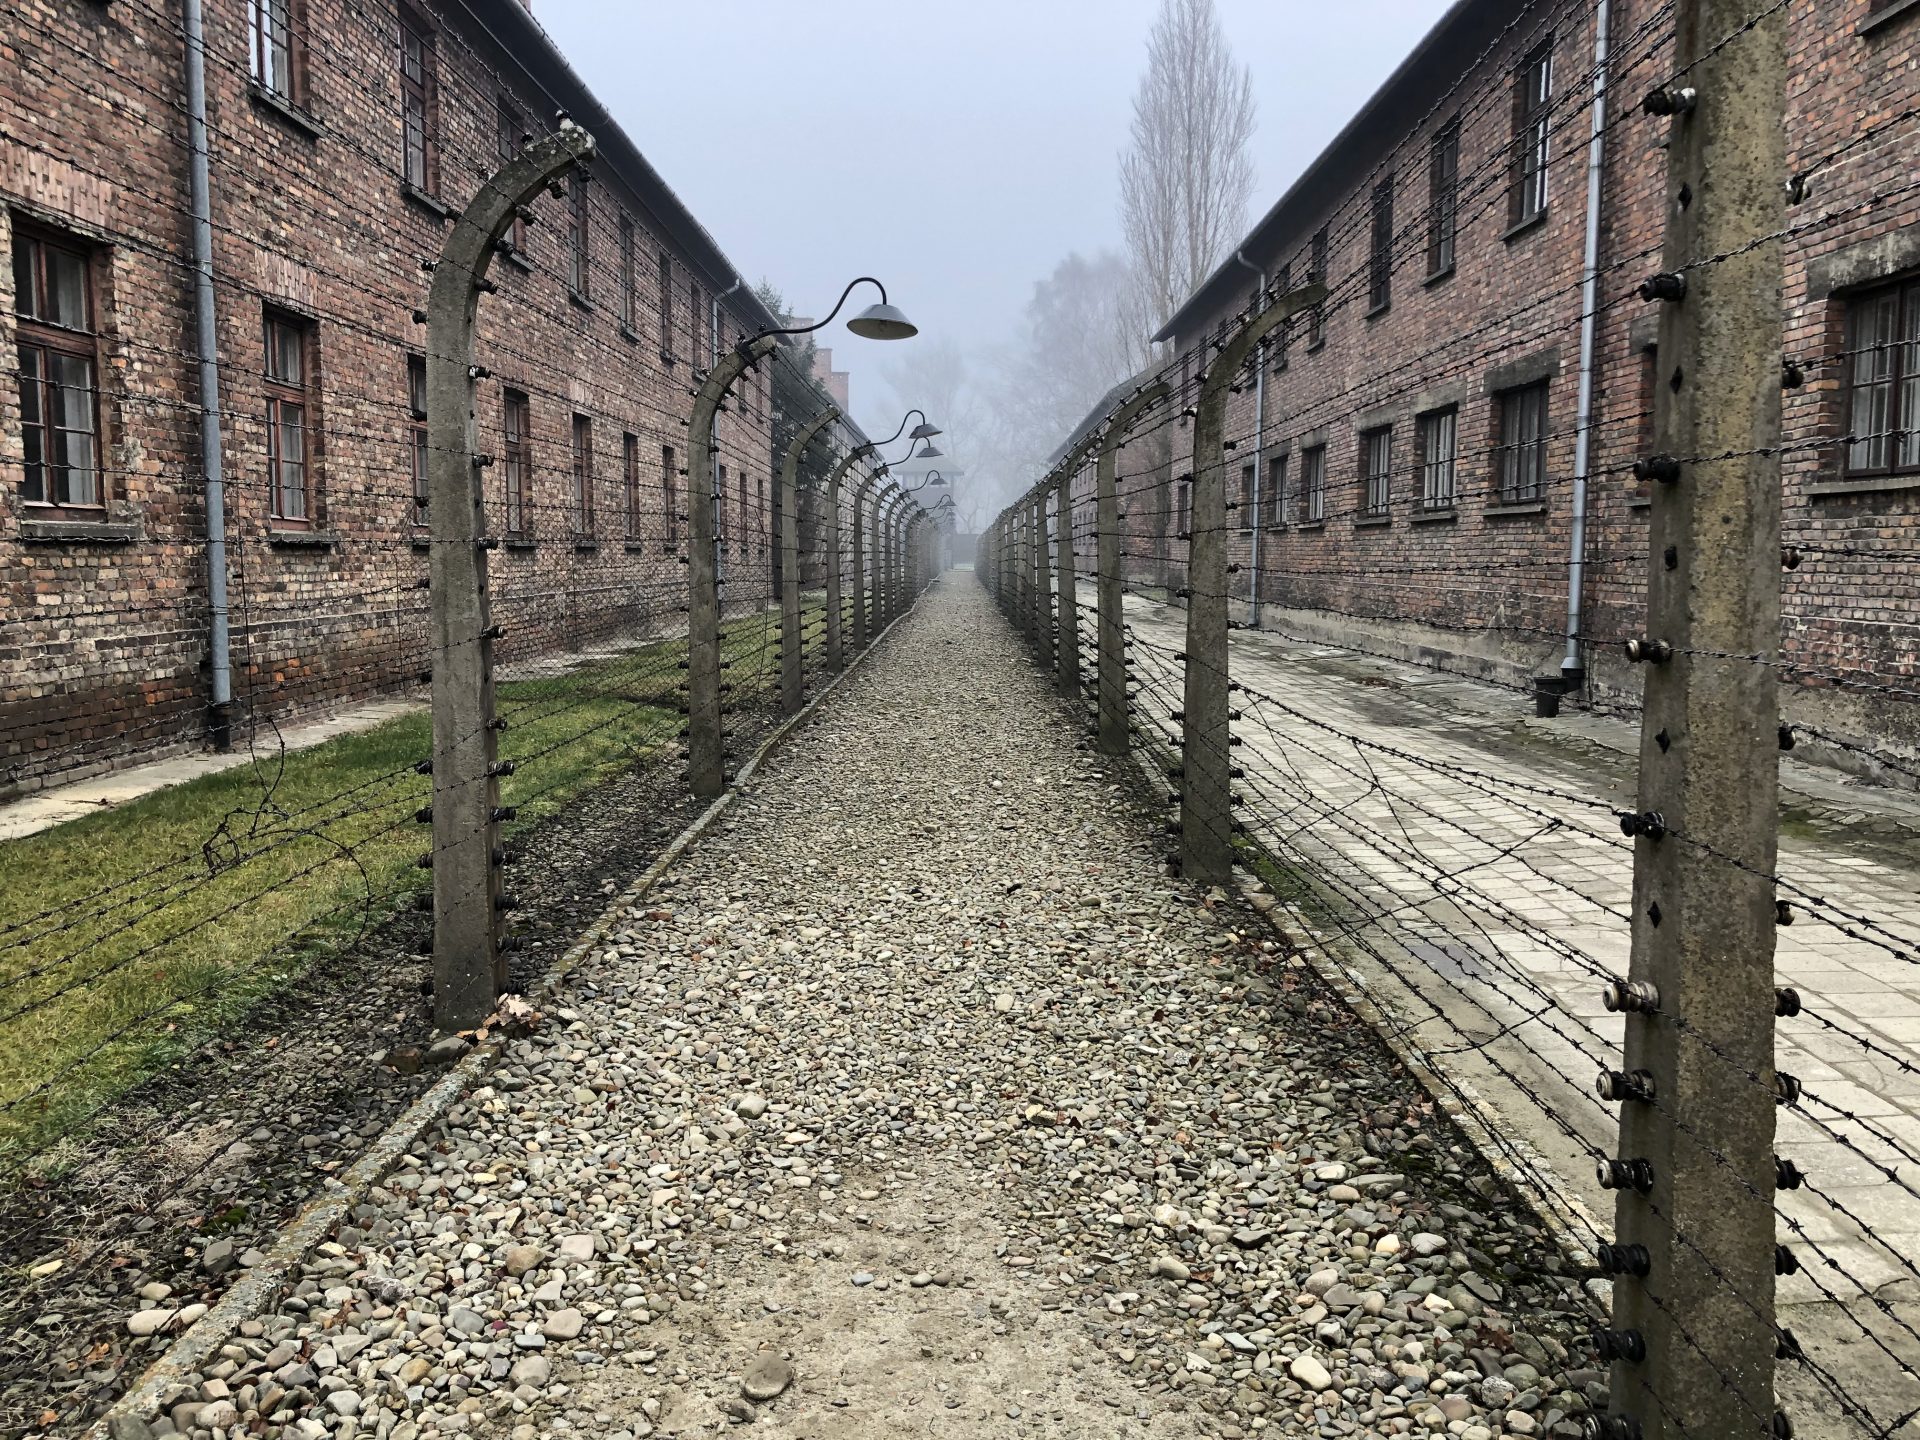 The former site of the Auschwitz death camp has been preserved to appear the same as it looked 75 years ago, when it was liberated by the Soviet Army. Some 1.3 million people were deported to the camp, and 1.1 million died there.